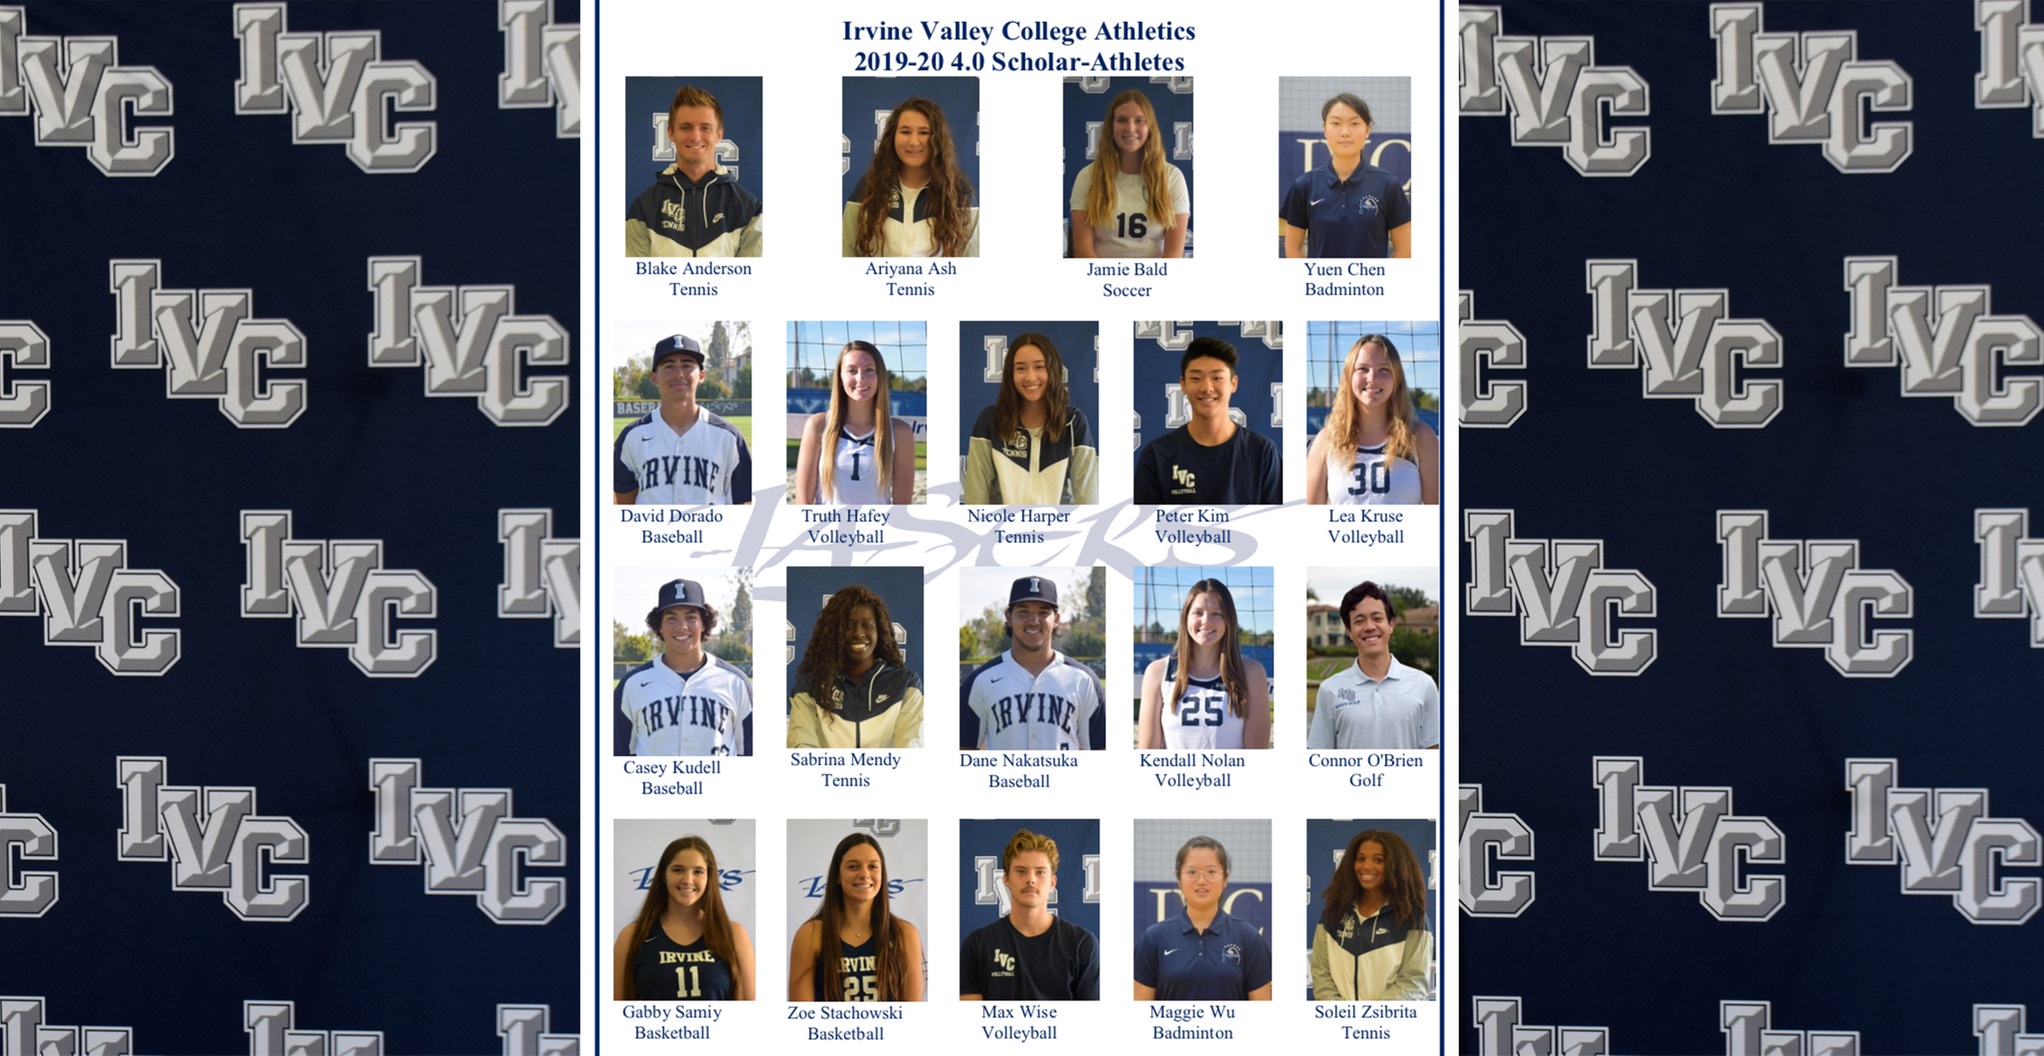 Honoring a record 107 Irvine Valley Scholar Athletes in 2019-20